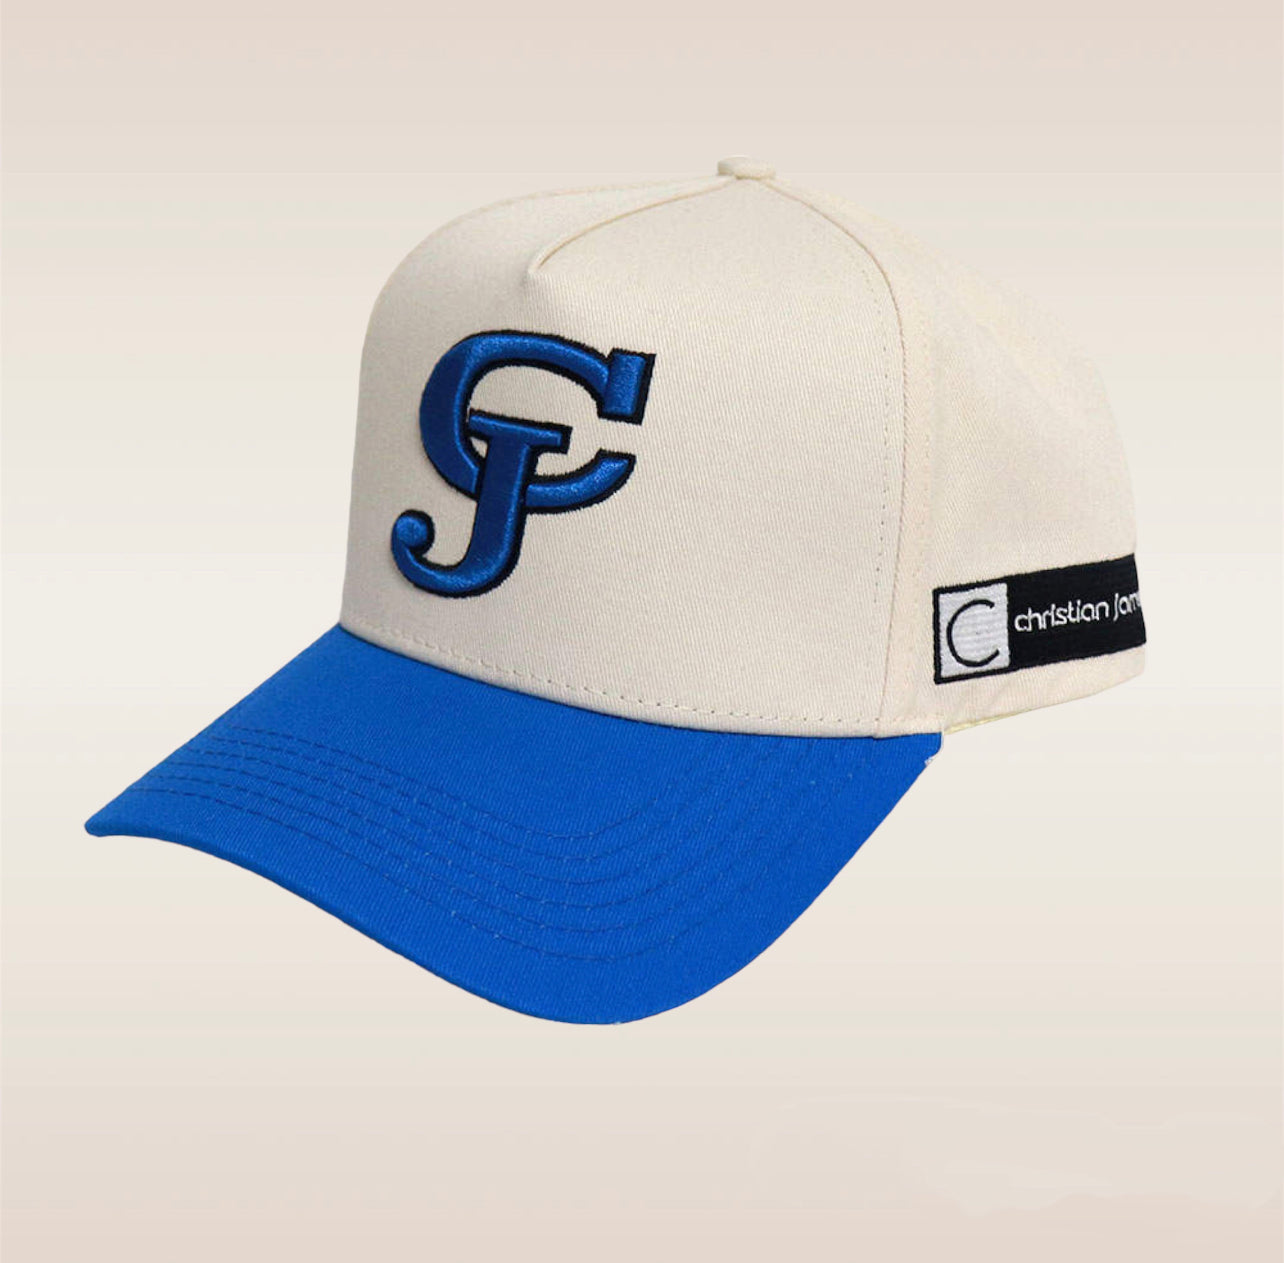 First ever Blue & White classic Christian James Snapback. Get yours today!